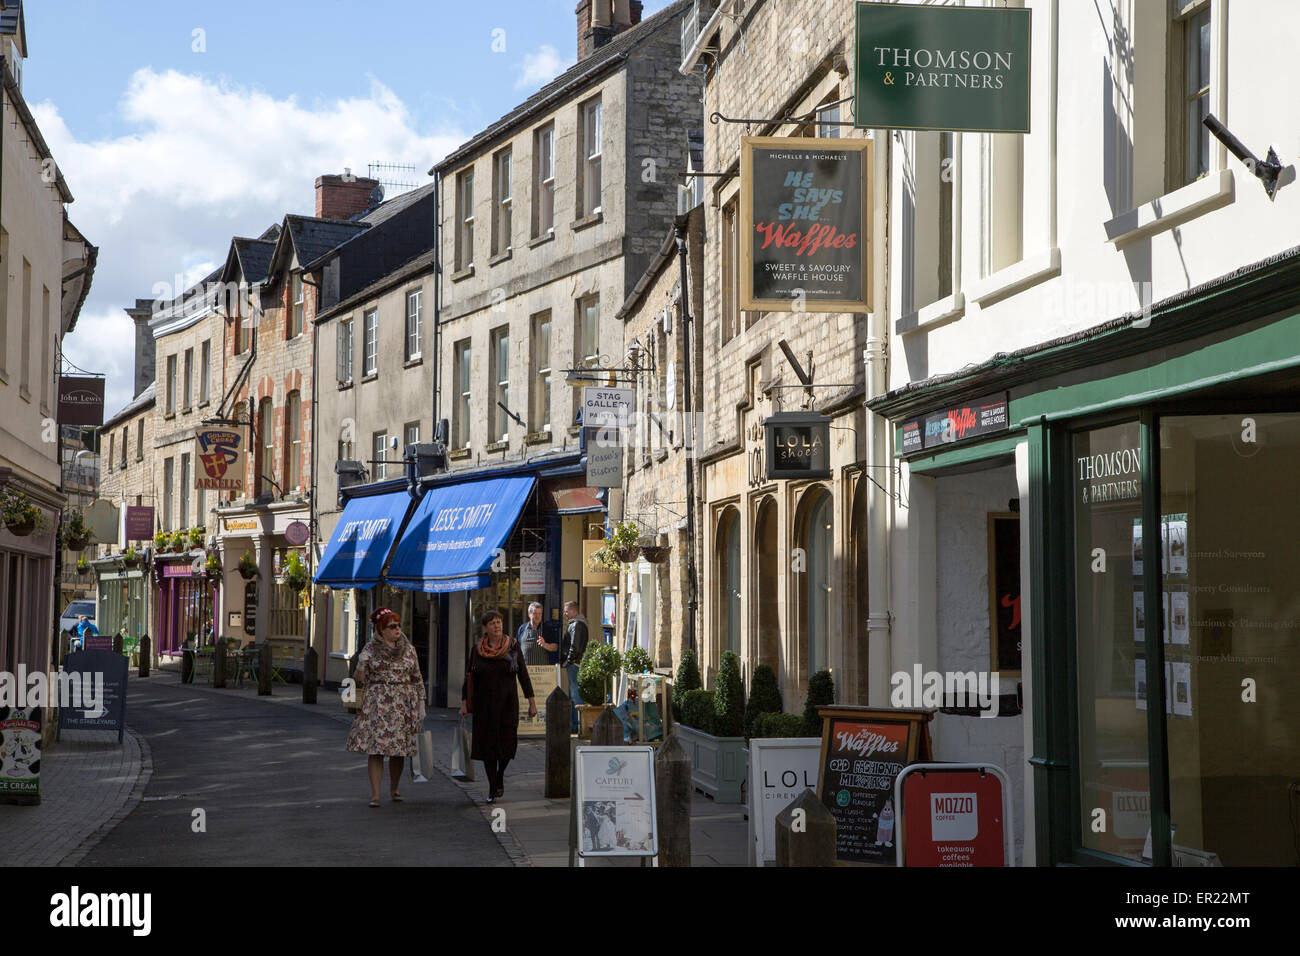 Narrow shopping street in town centre, Cirencester, Gloucestershire, England, UK, Stock Photo